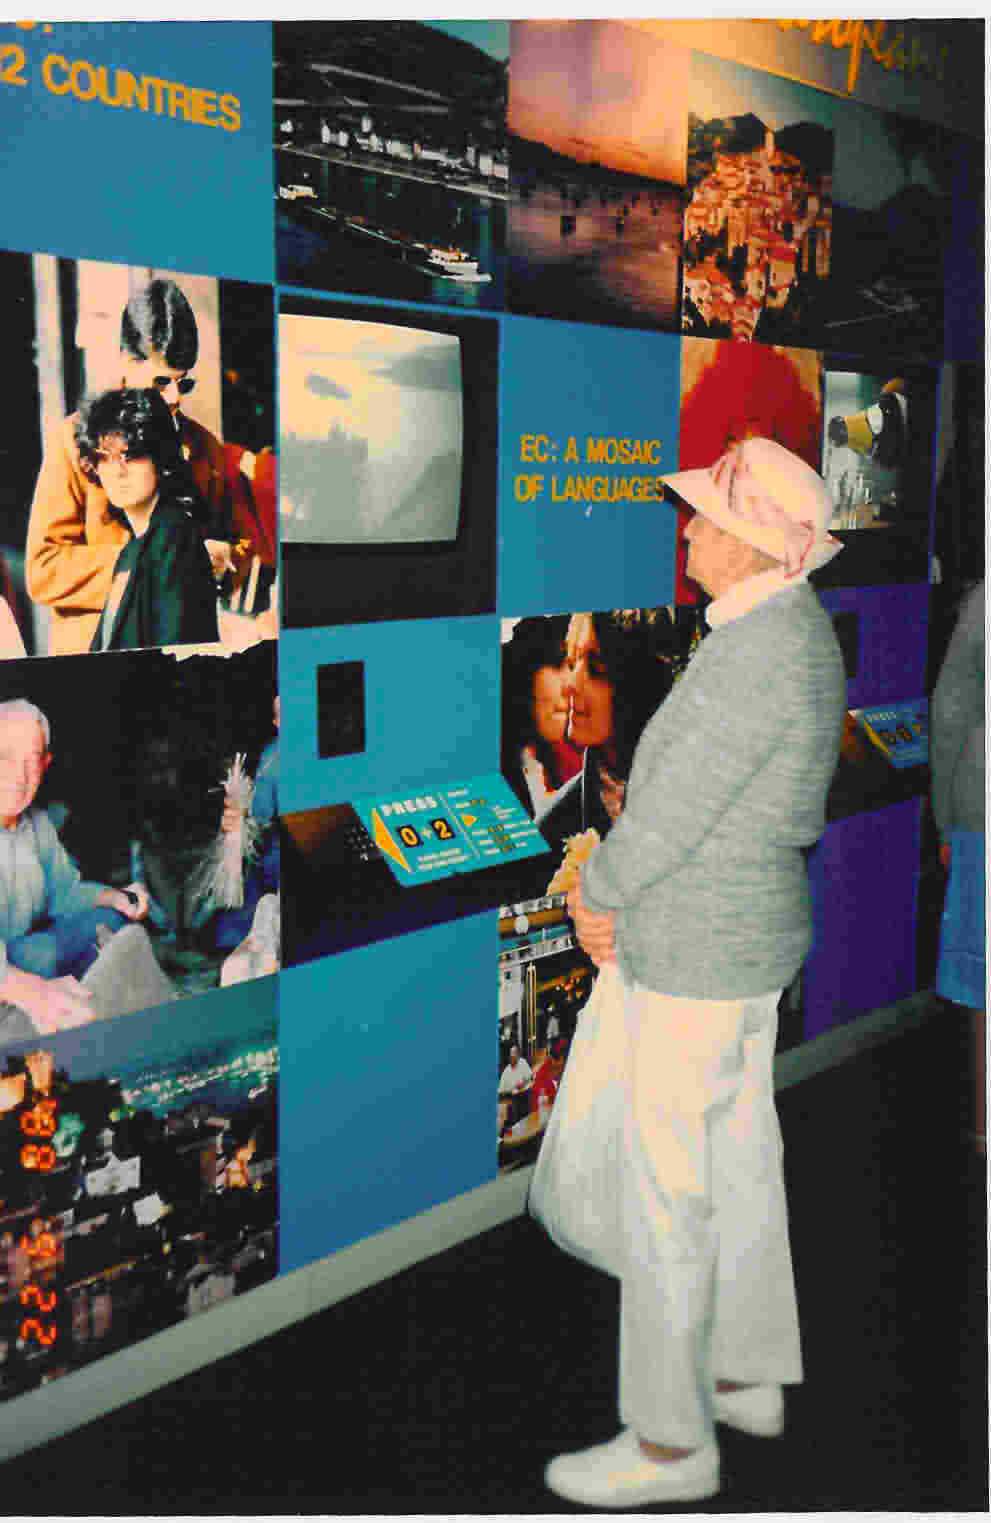 Some of the interactive displays on
                show at the European Community Pavilion